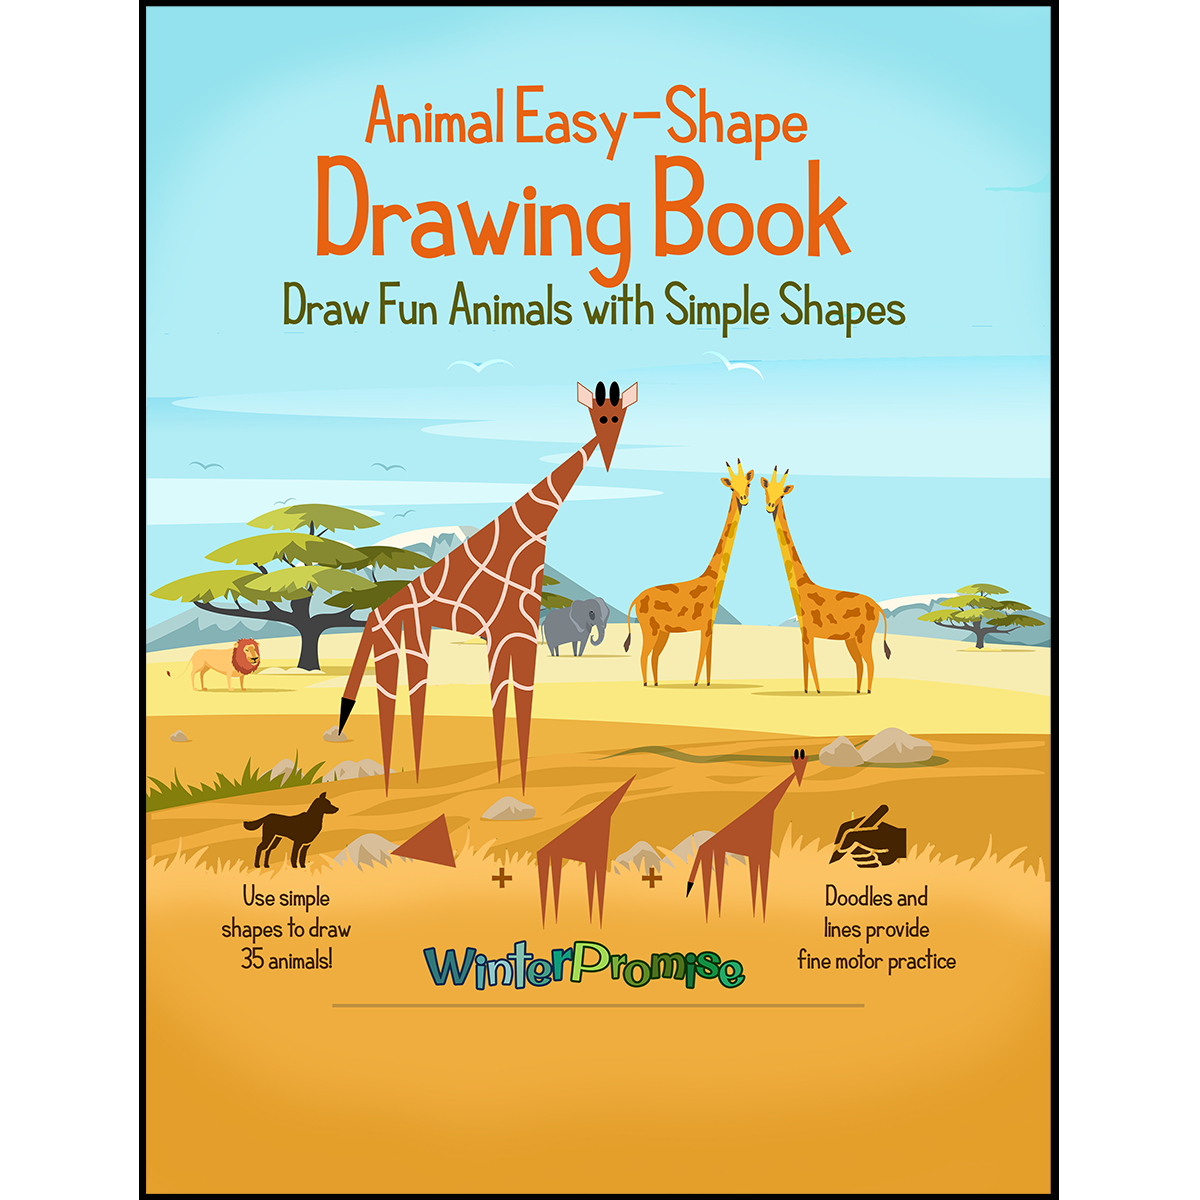 zoo drawing|| how to draw zoo| zoo drawing easy| zoo ki drawing|zoo drawing  for kids|drawing of zoo - YouTube